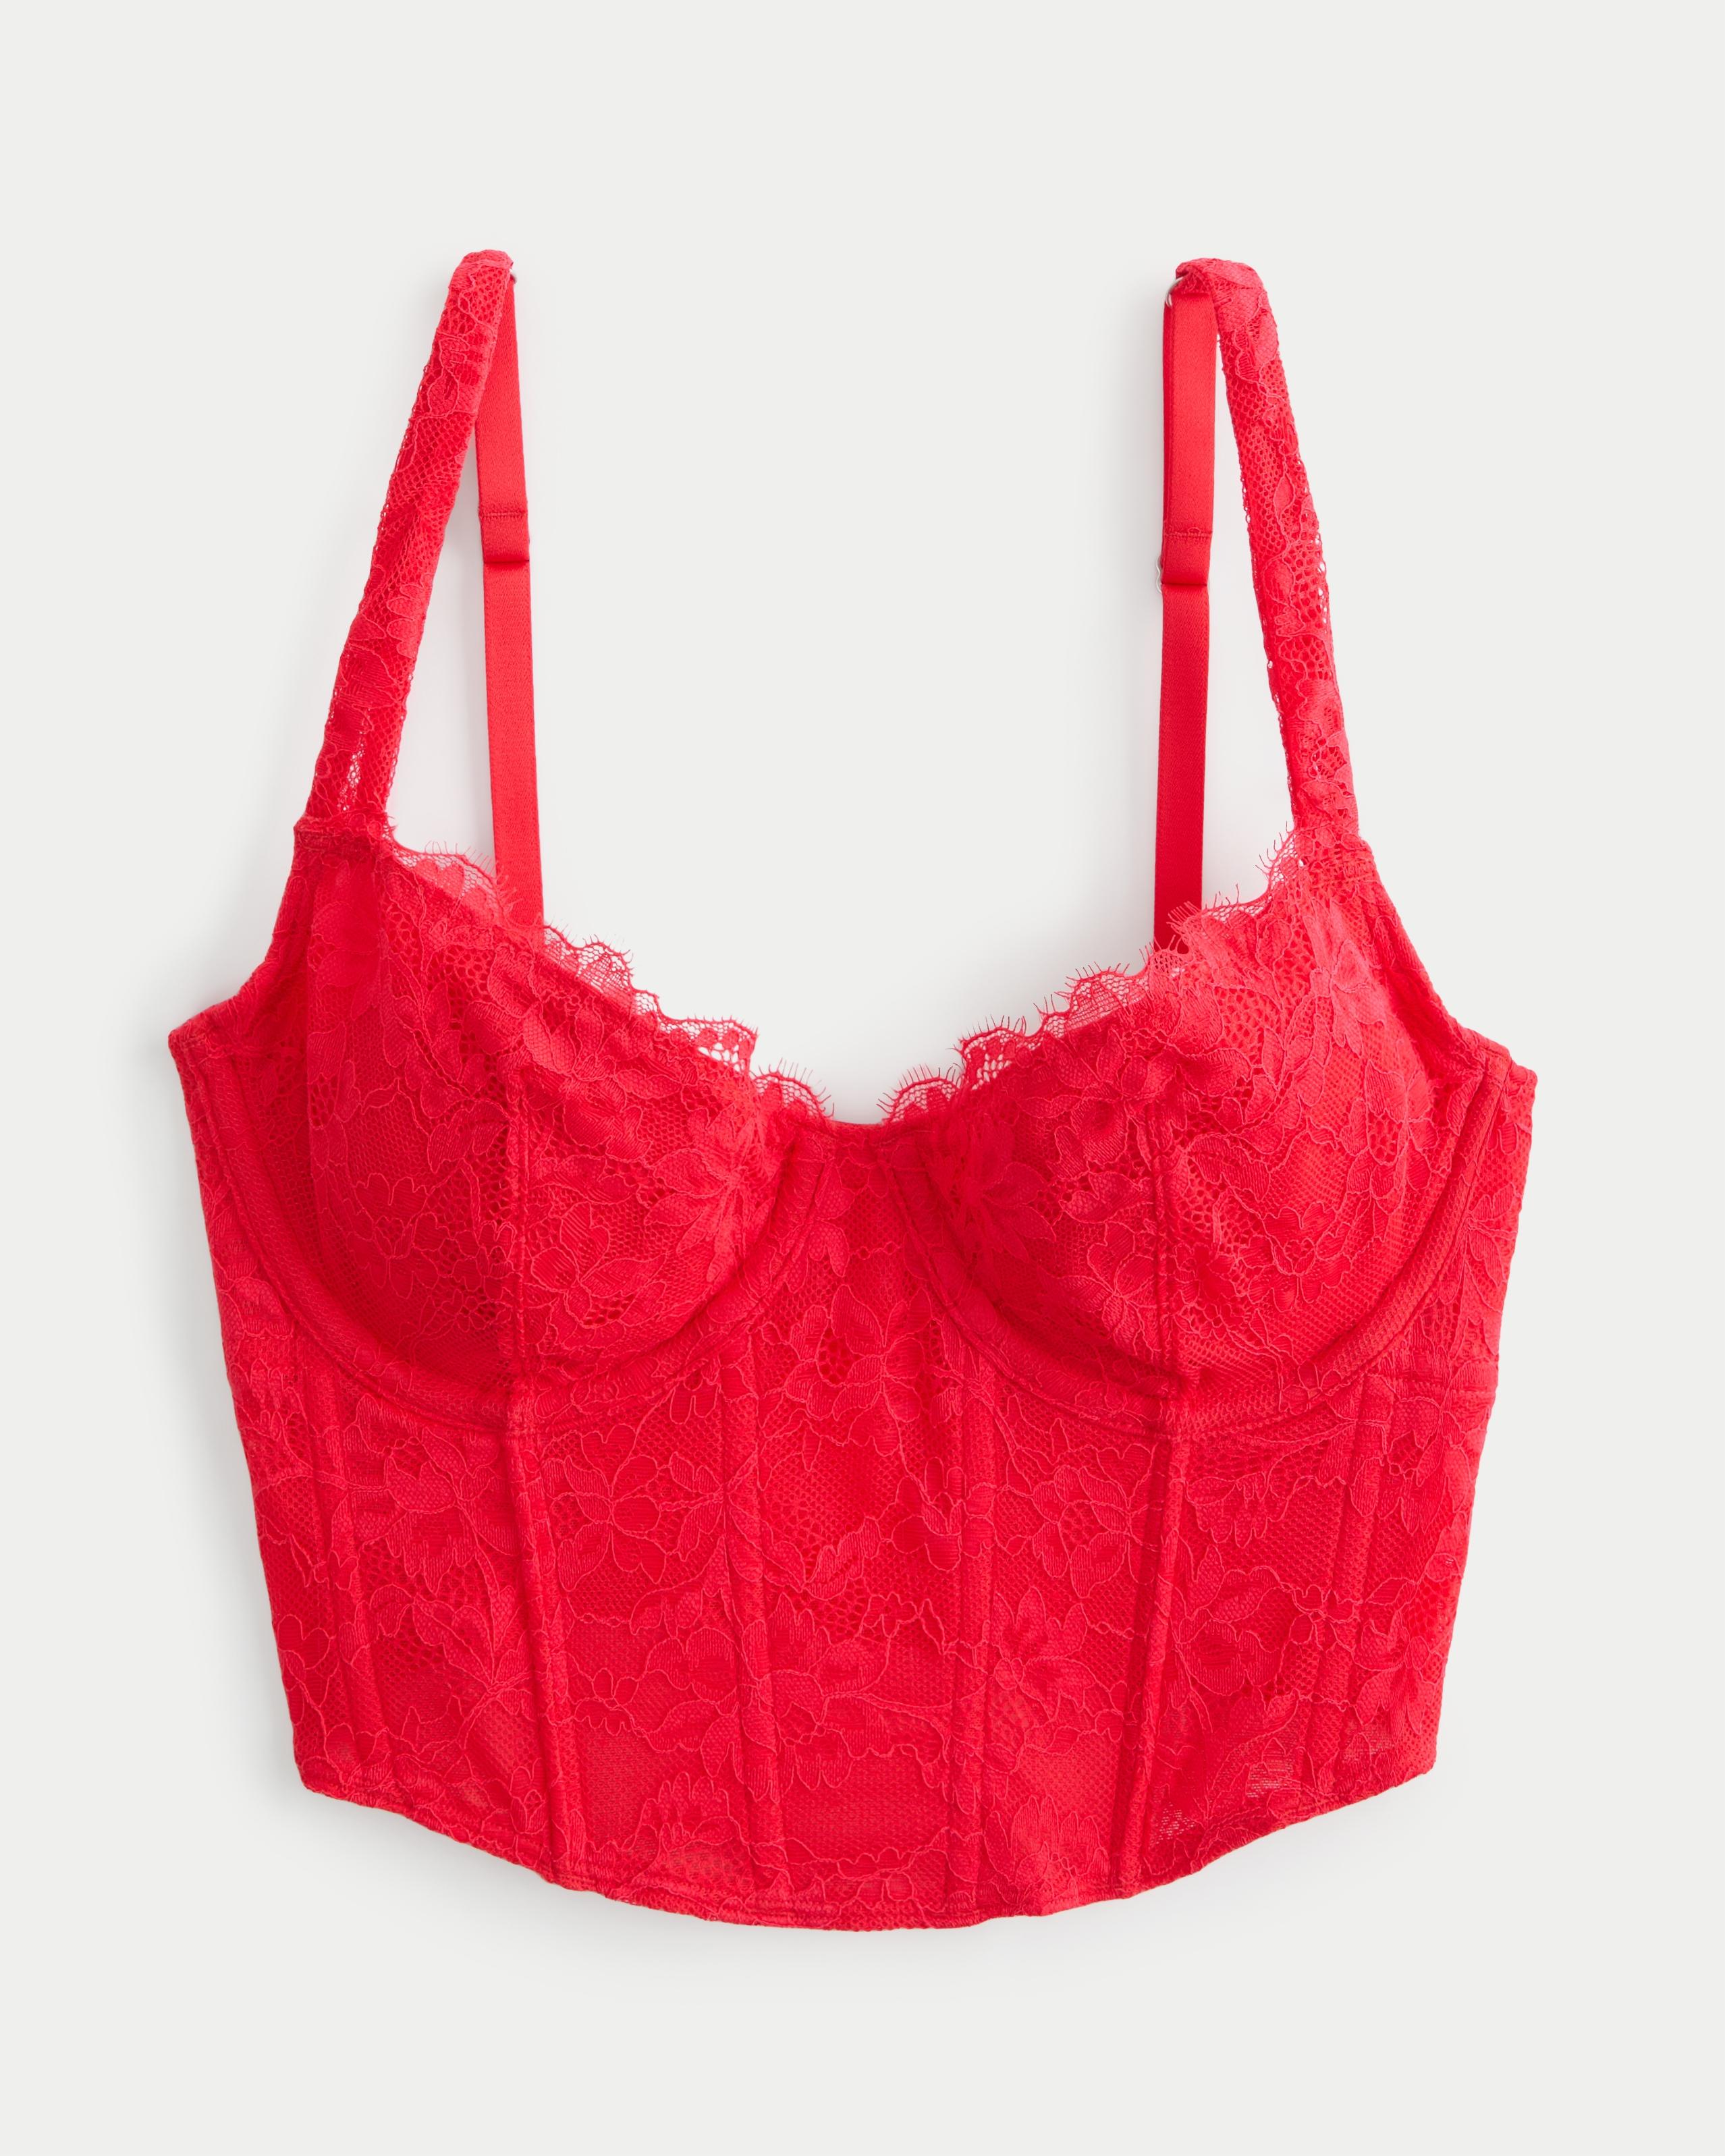 Hollister Gilly Hicks Lace Bustier in Red